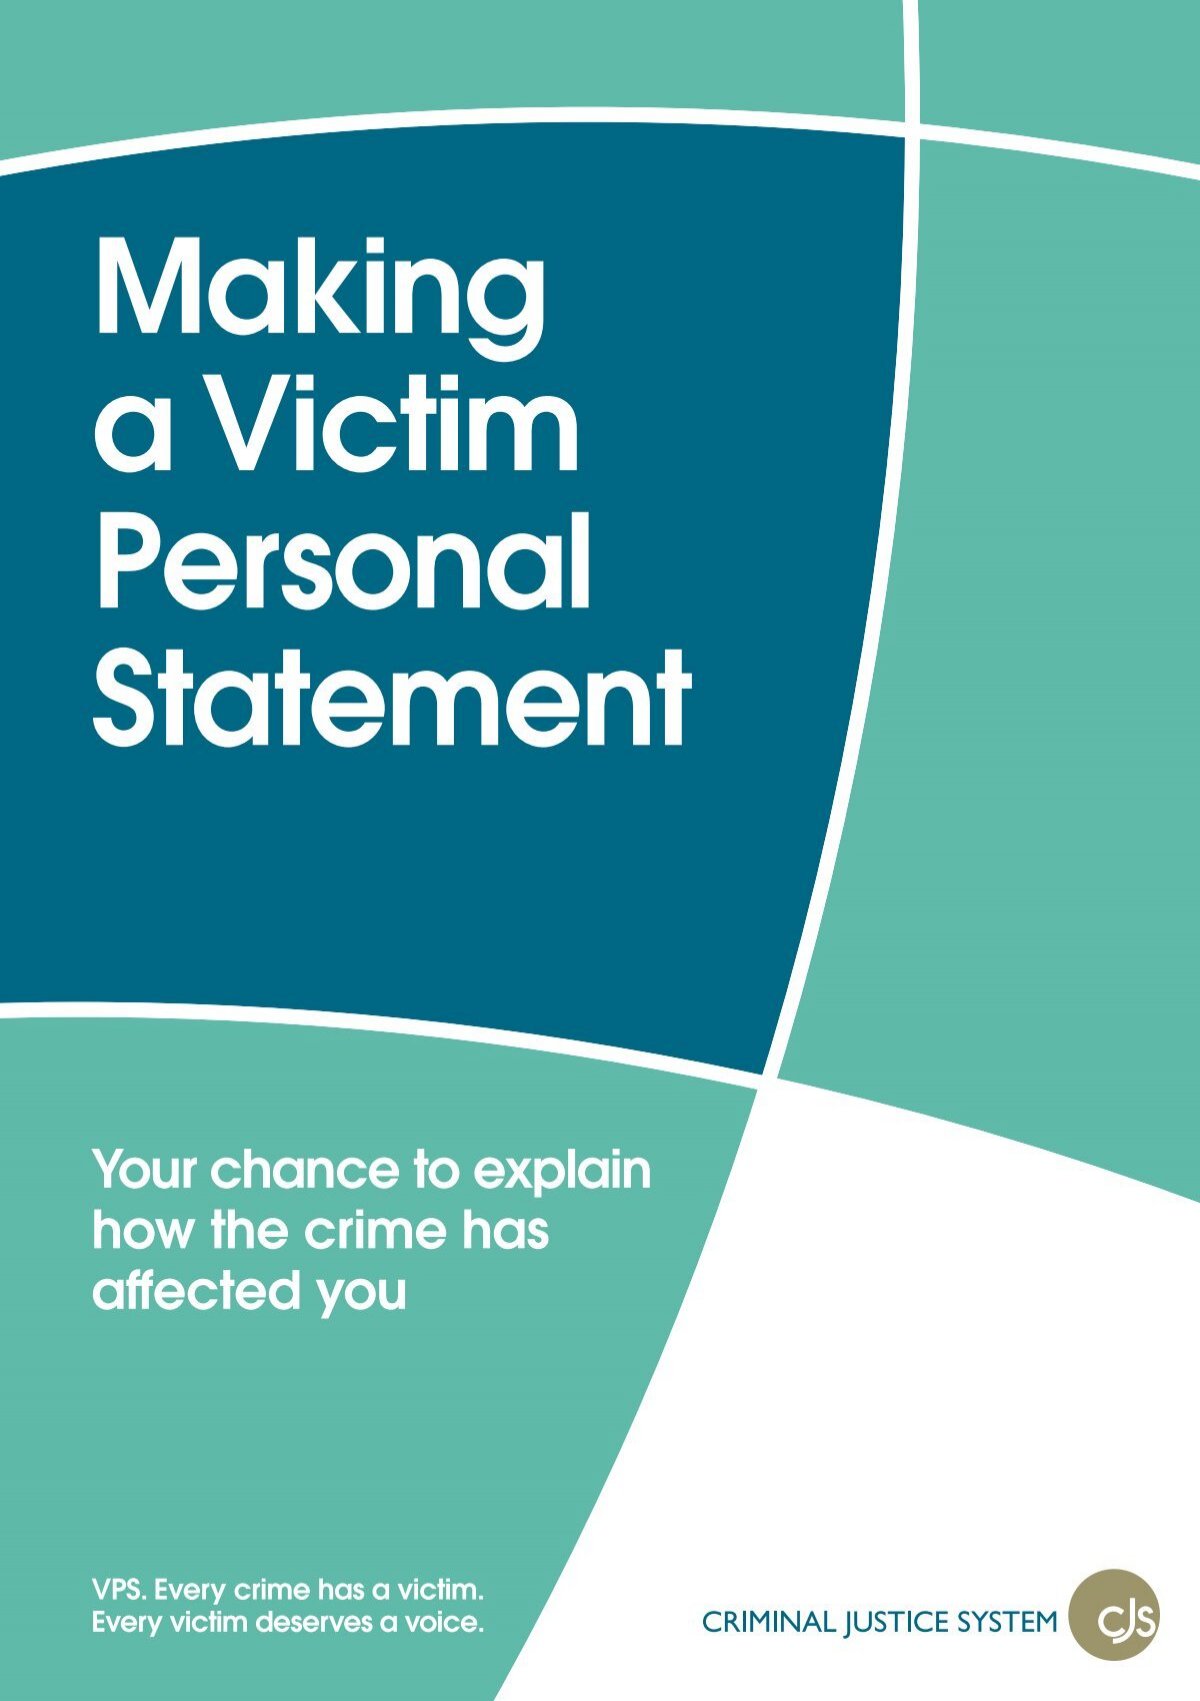 introduction of victim personal statements